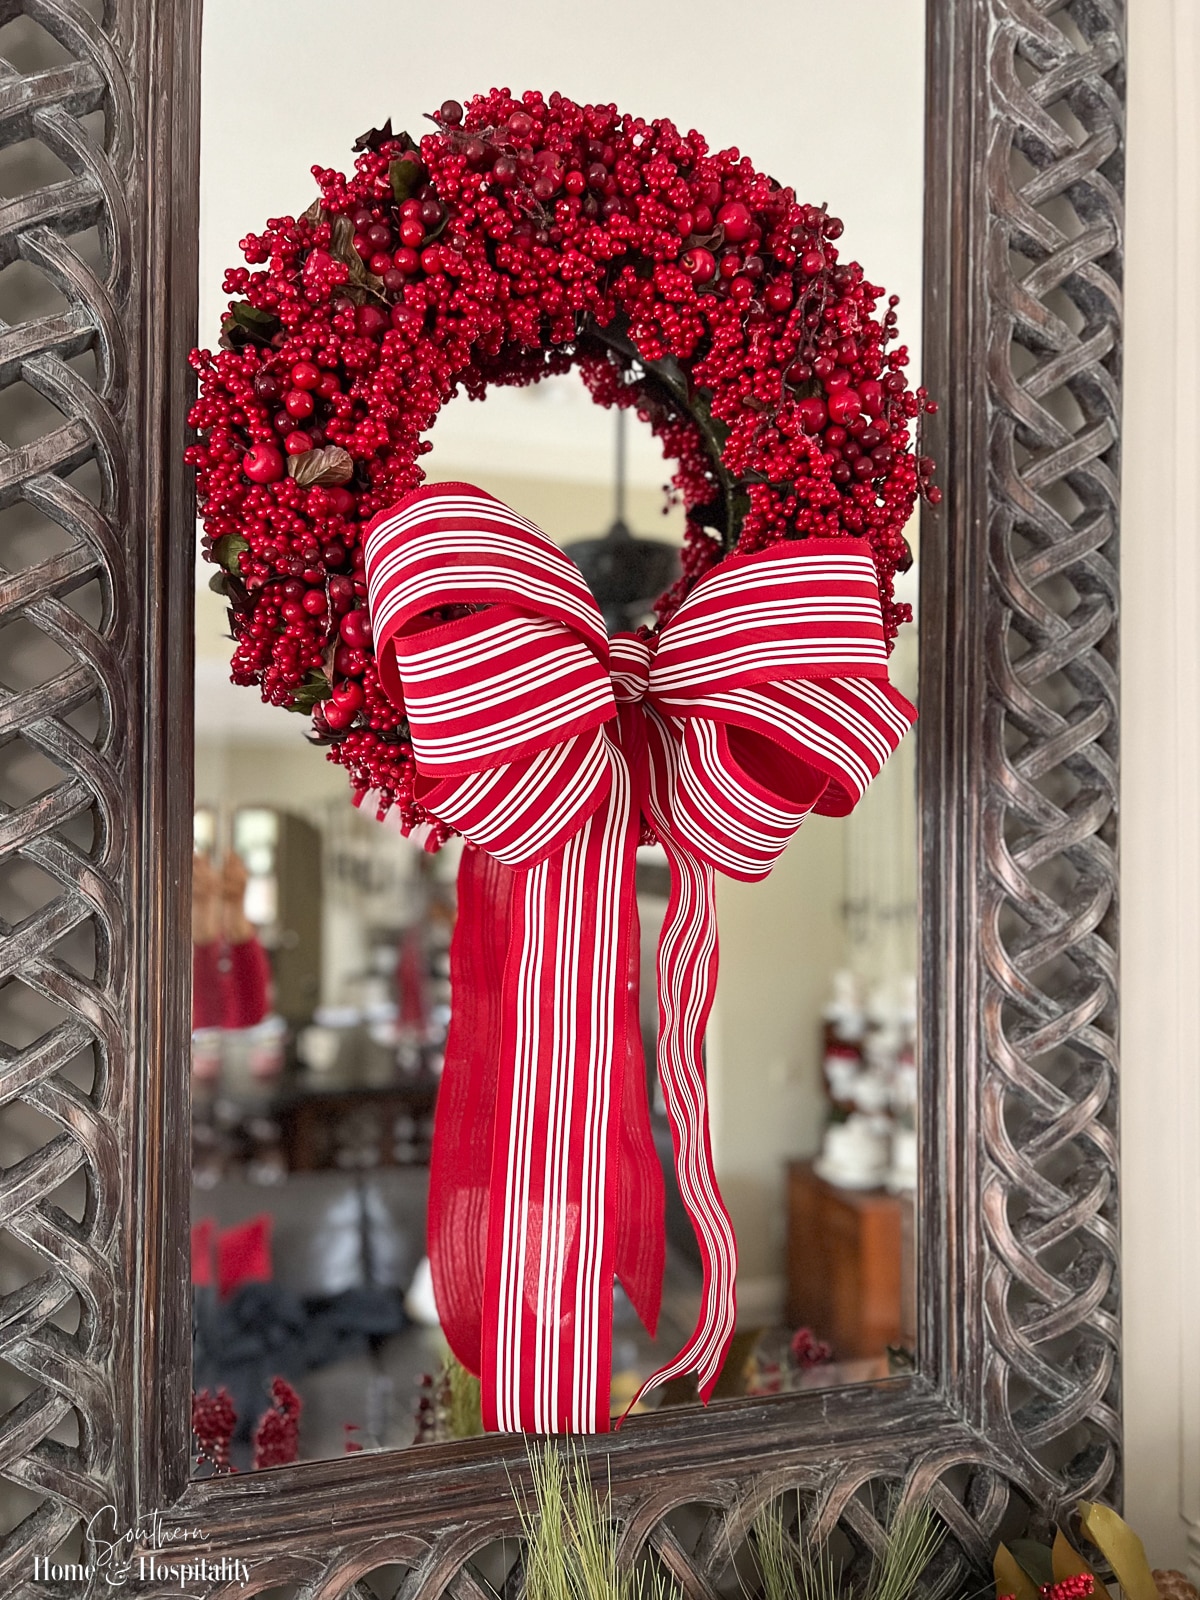 How to Make an Easy Bow for a Wreath in Minutes